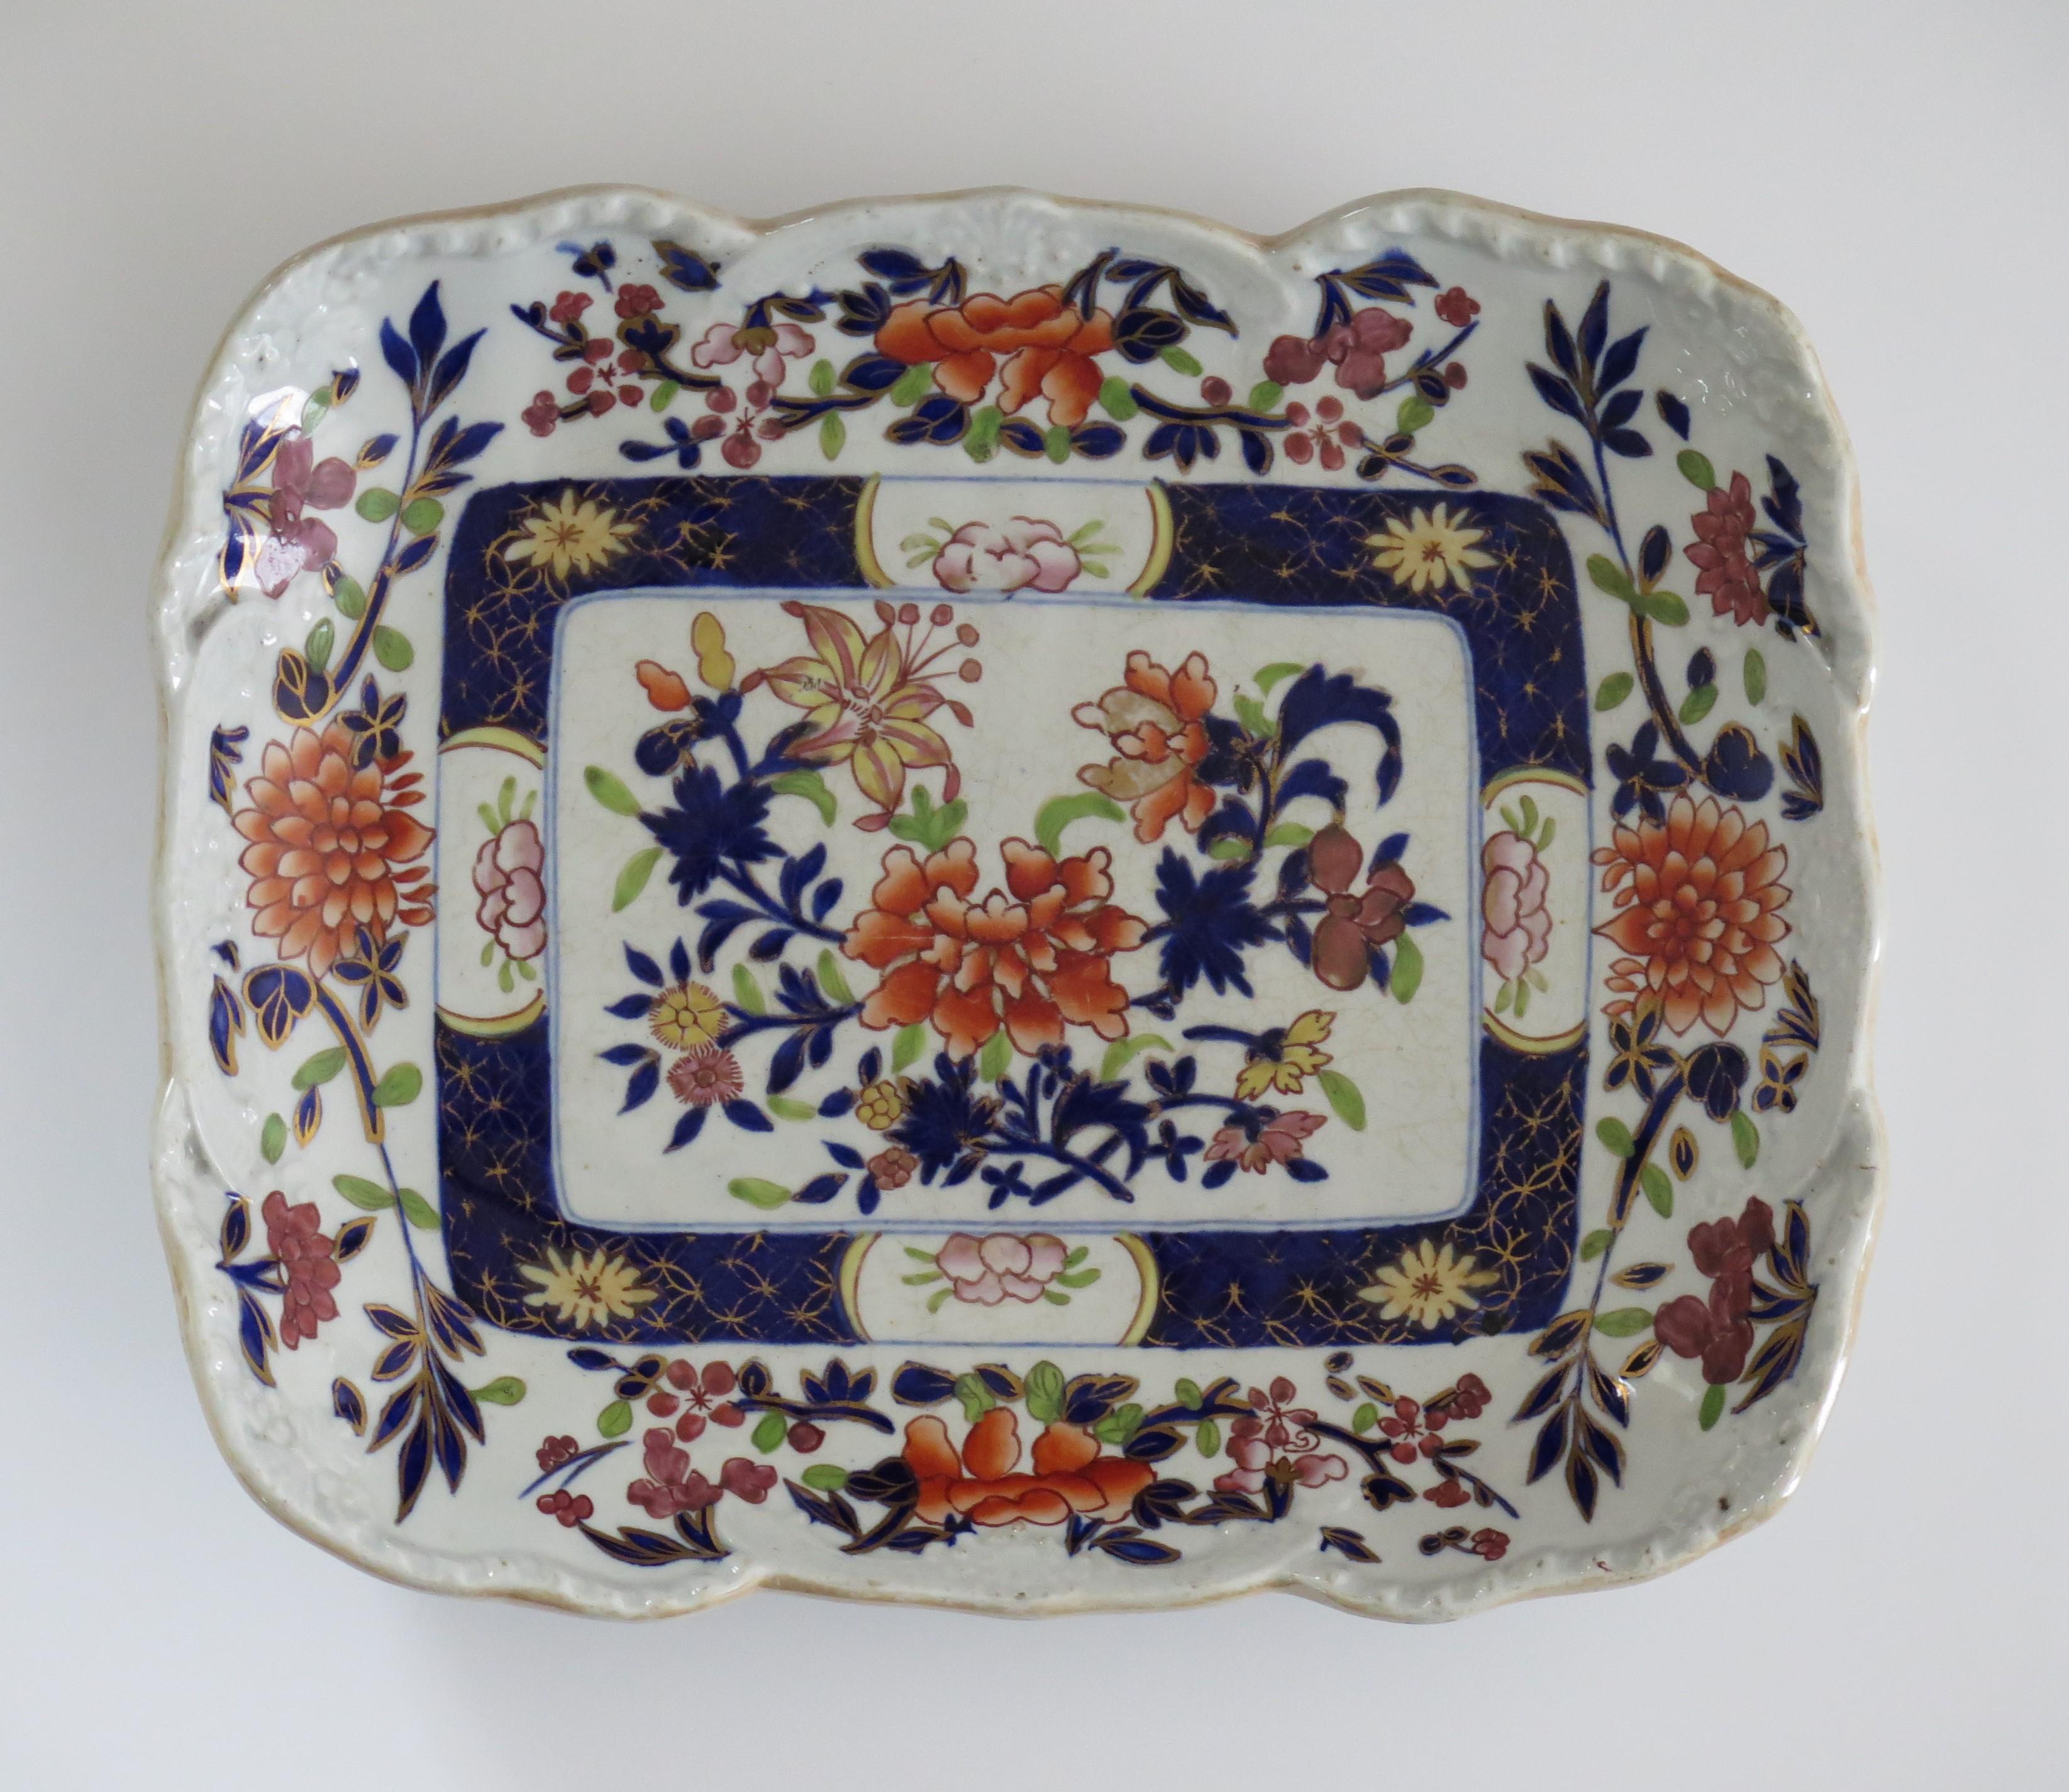 This is a very decorative Mason's Ironstone Platter produced by the Mason's factory at Lane Delph, Staffordshire, England, circa 1820.

The platter is rectangular with a wavy edge and having a moulded edge design.

The plate is beautifully